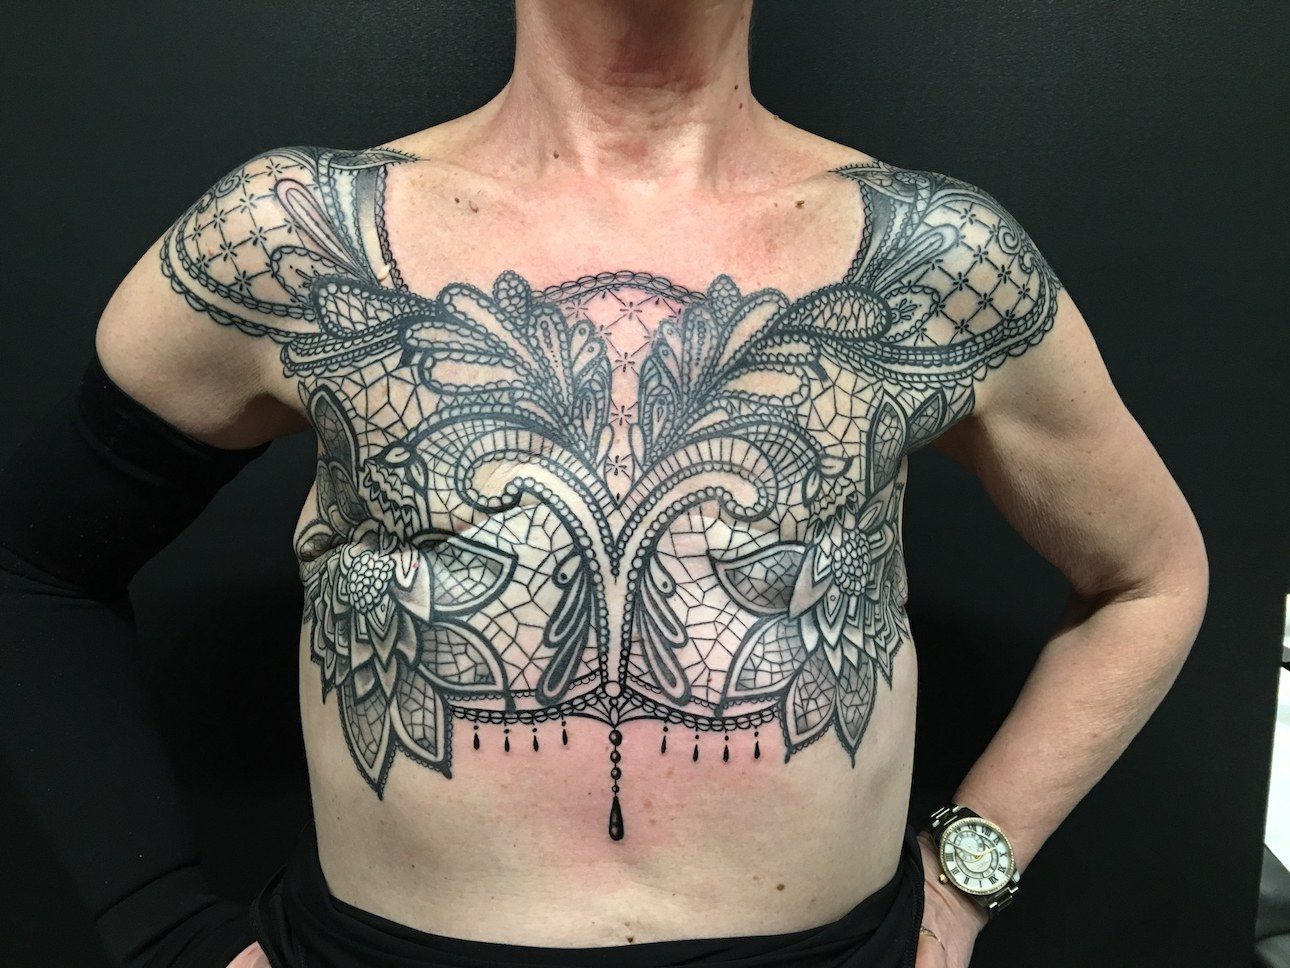 This Woman Got An Incredible Mastectomy Tattoo On Her Chest Self intended for dimensions 1290 X 968